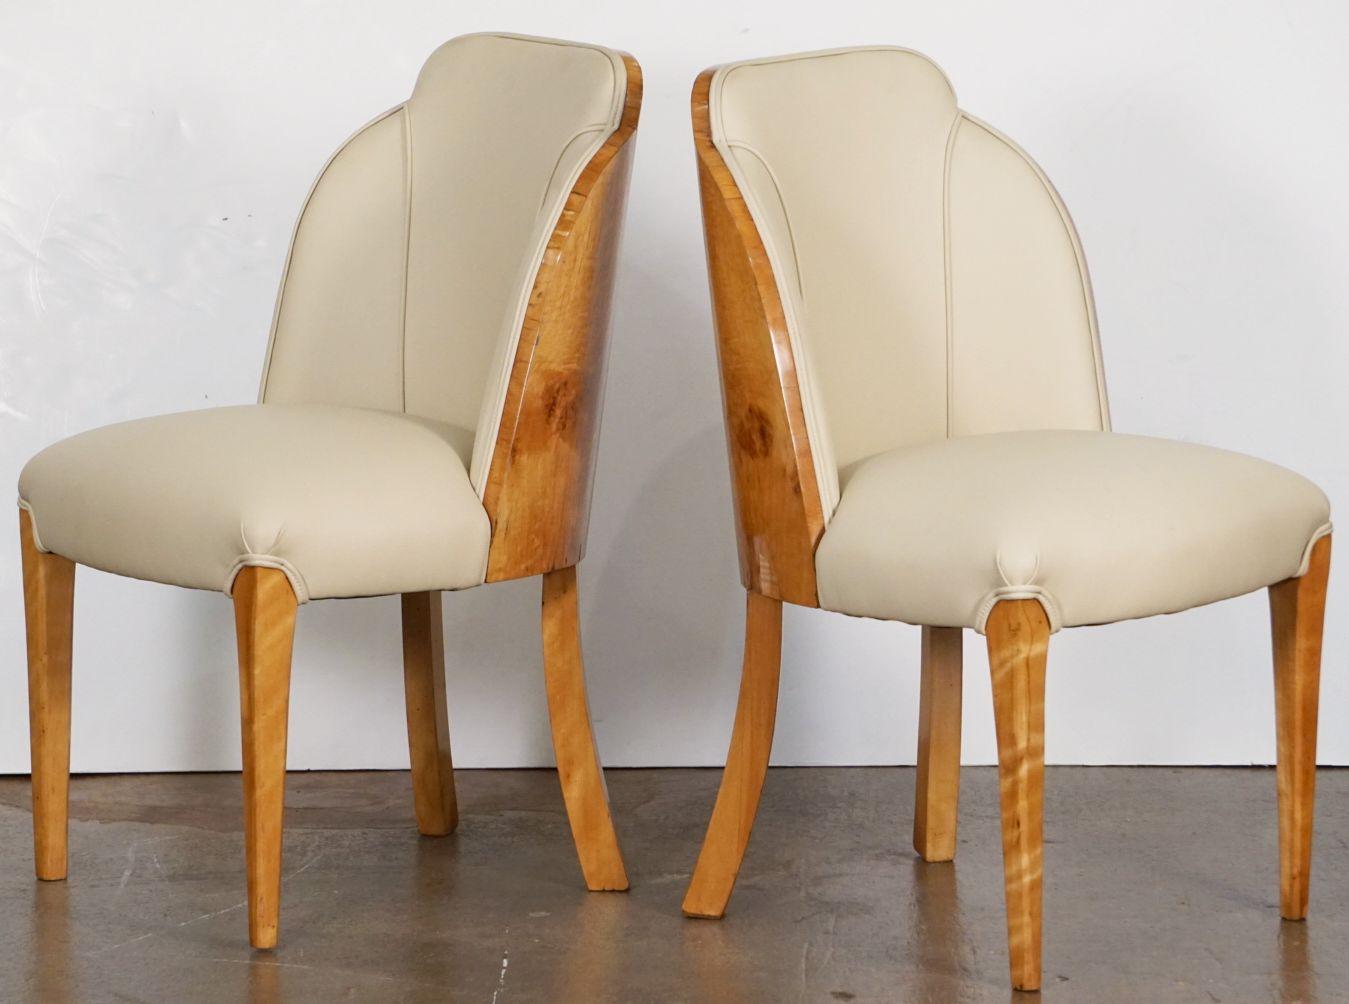 English Art Deco Chairs of Burled Walnut and Leather Attributed to Harry and Lou Epstein For Sale